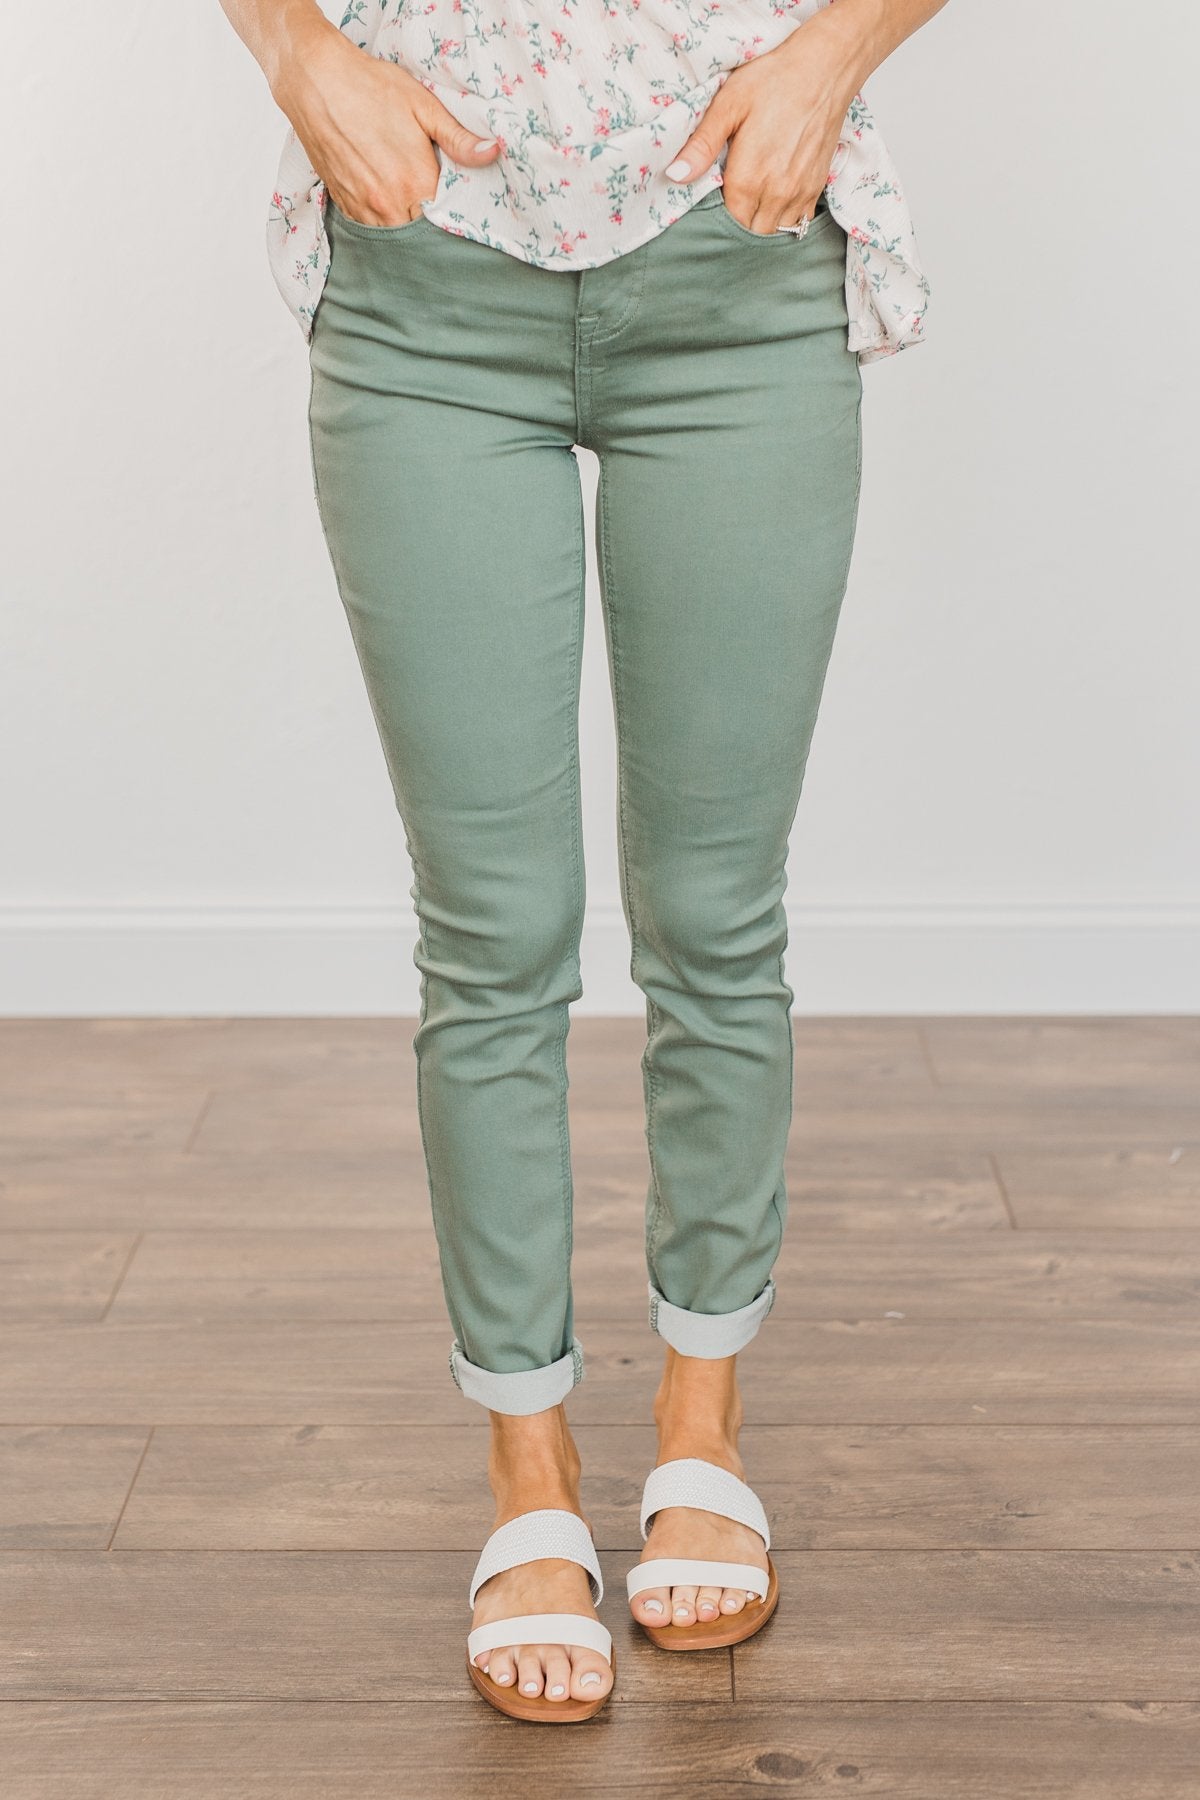 Rubberband Stretch Skinny Jeans- Paris Wash – The Pulse Boutique